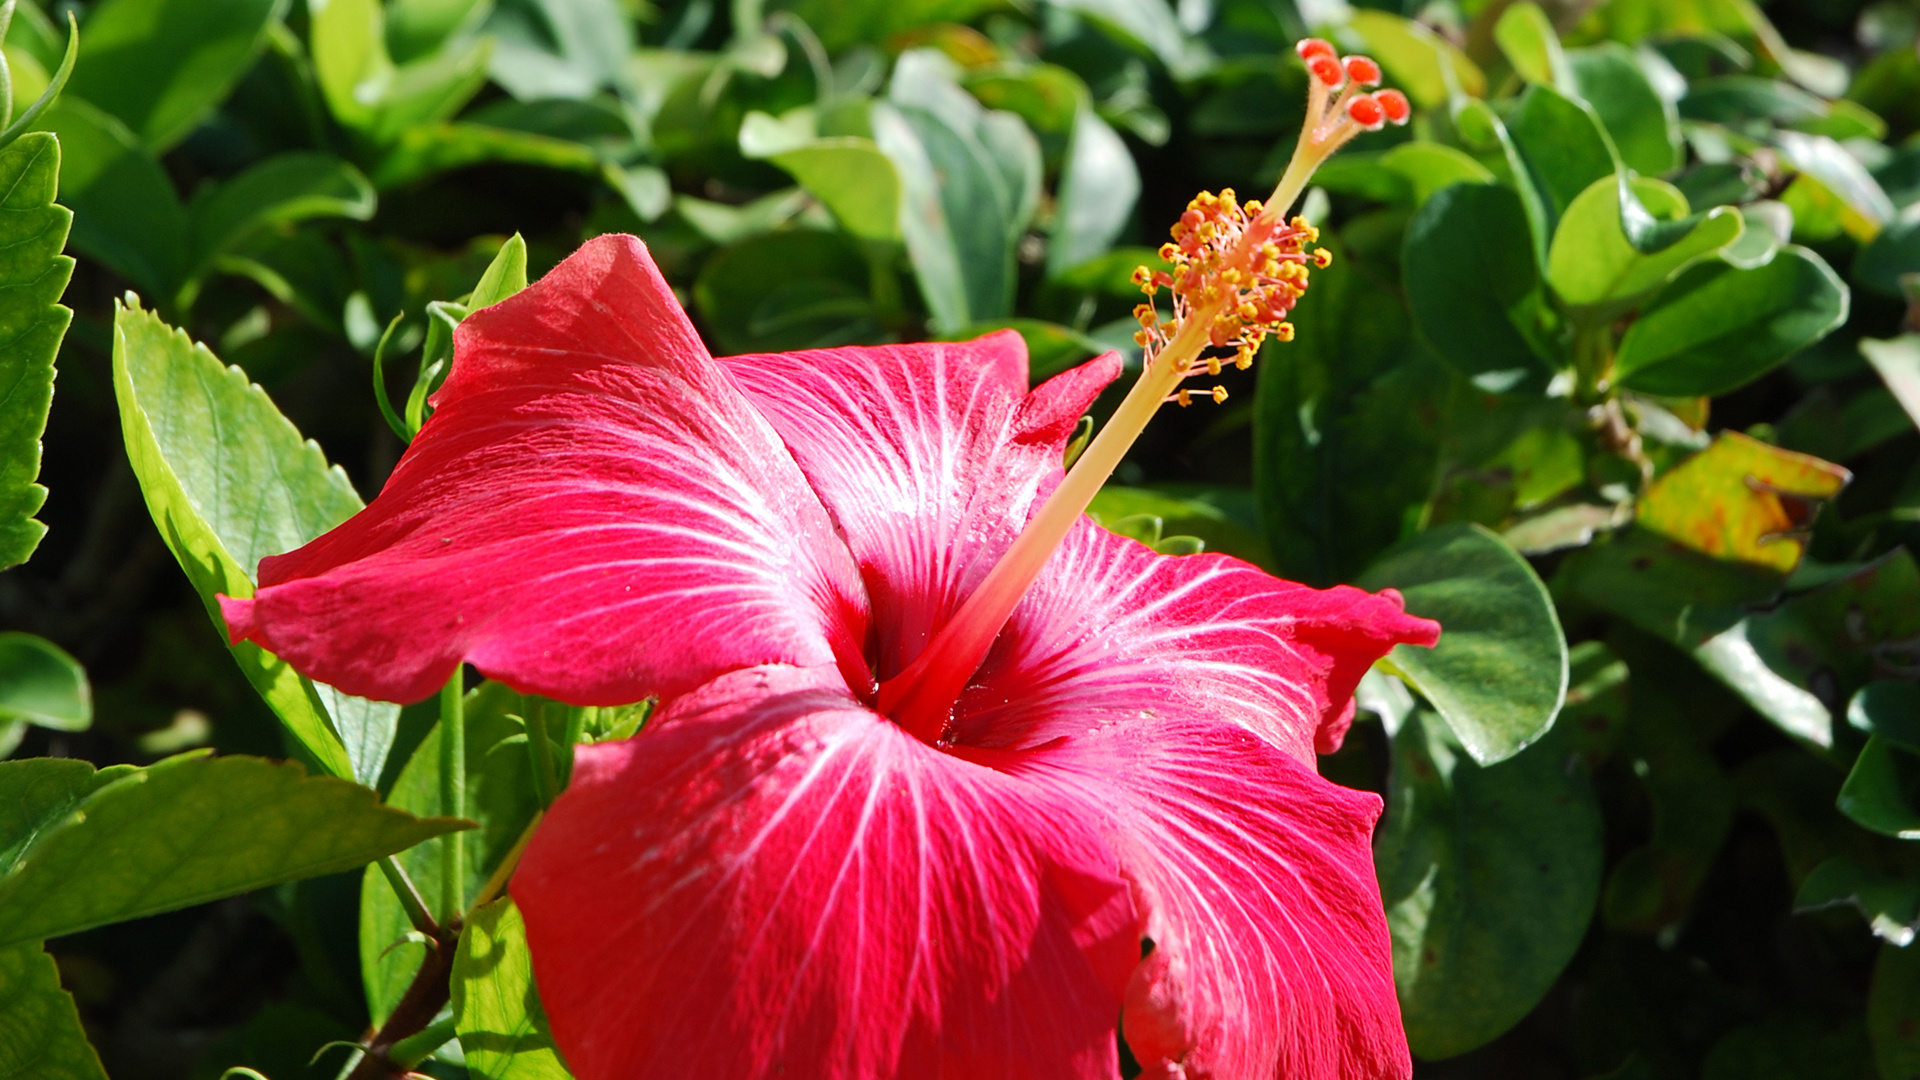 Hibiscus flower, Nature's beauty, Floral delight, Free download, 1920x1080 Full HD Desktop